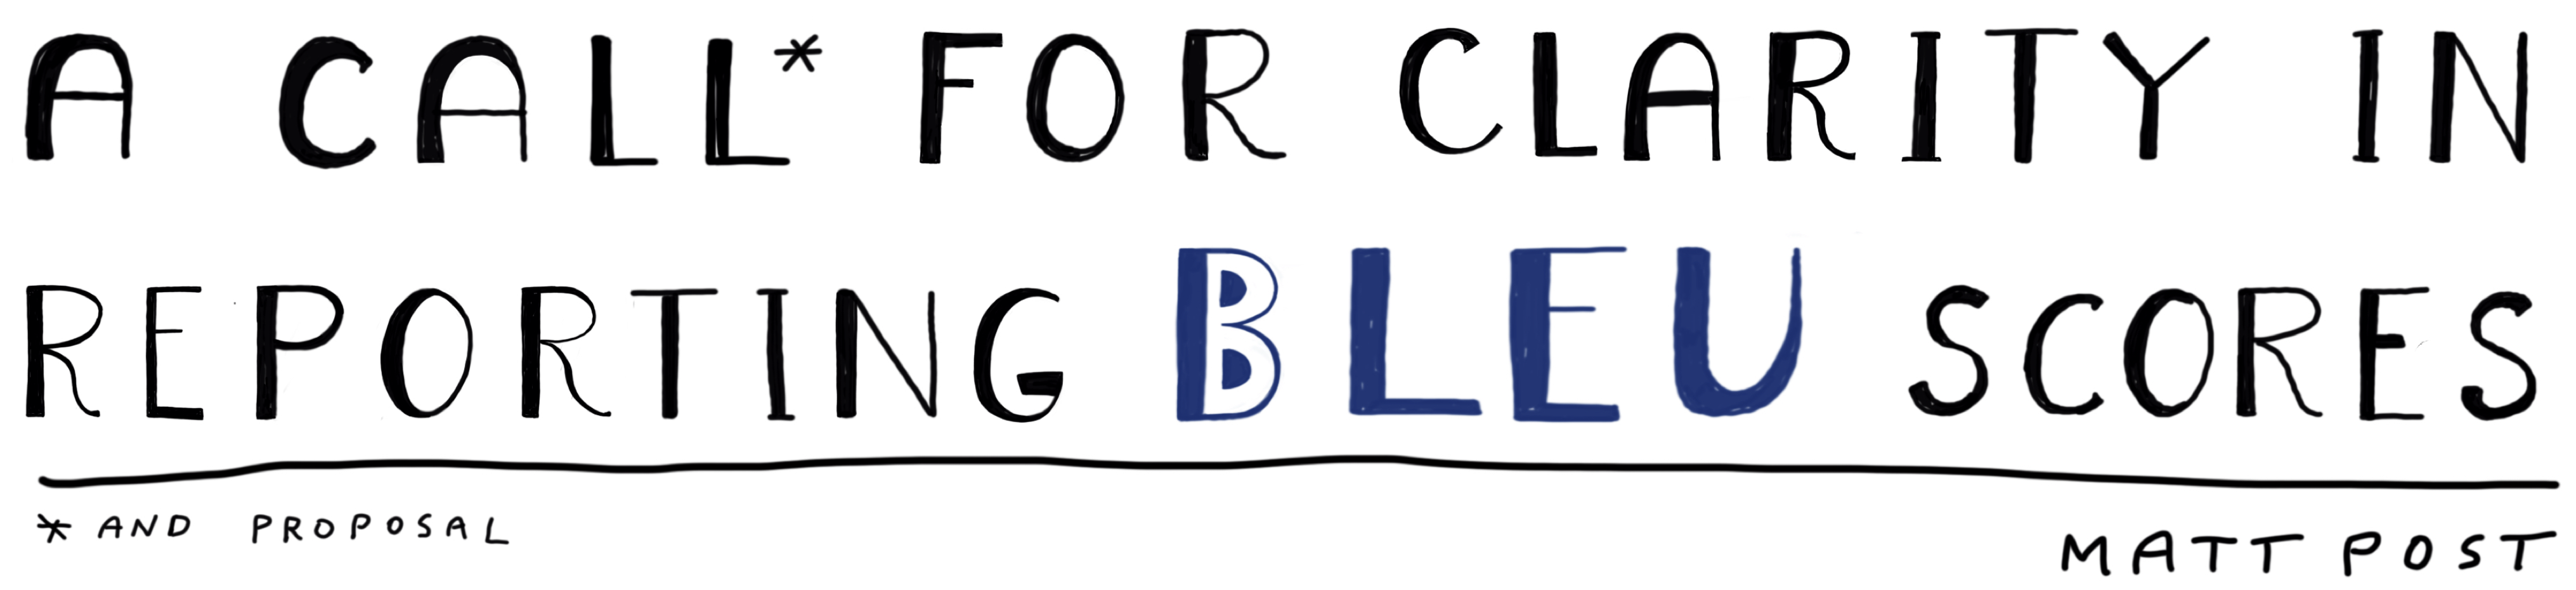 Title: "A call (and proposal) for clarity in reporting BLEU scores". Author: Matt Post.</figcaption>